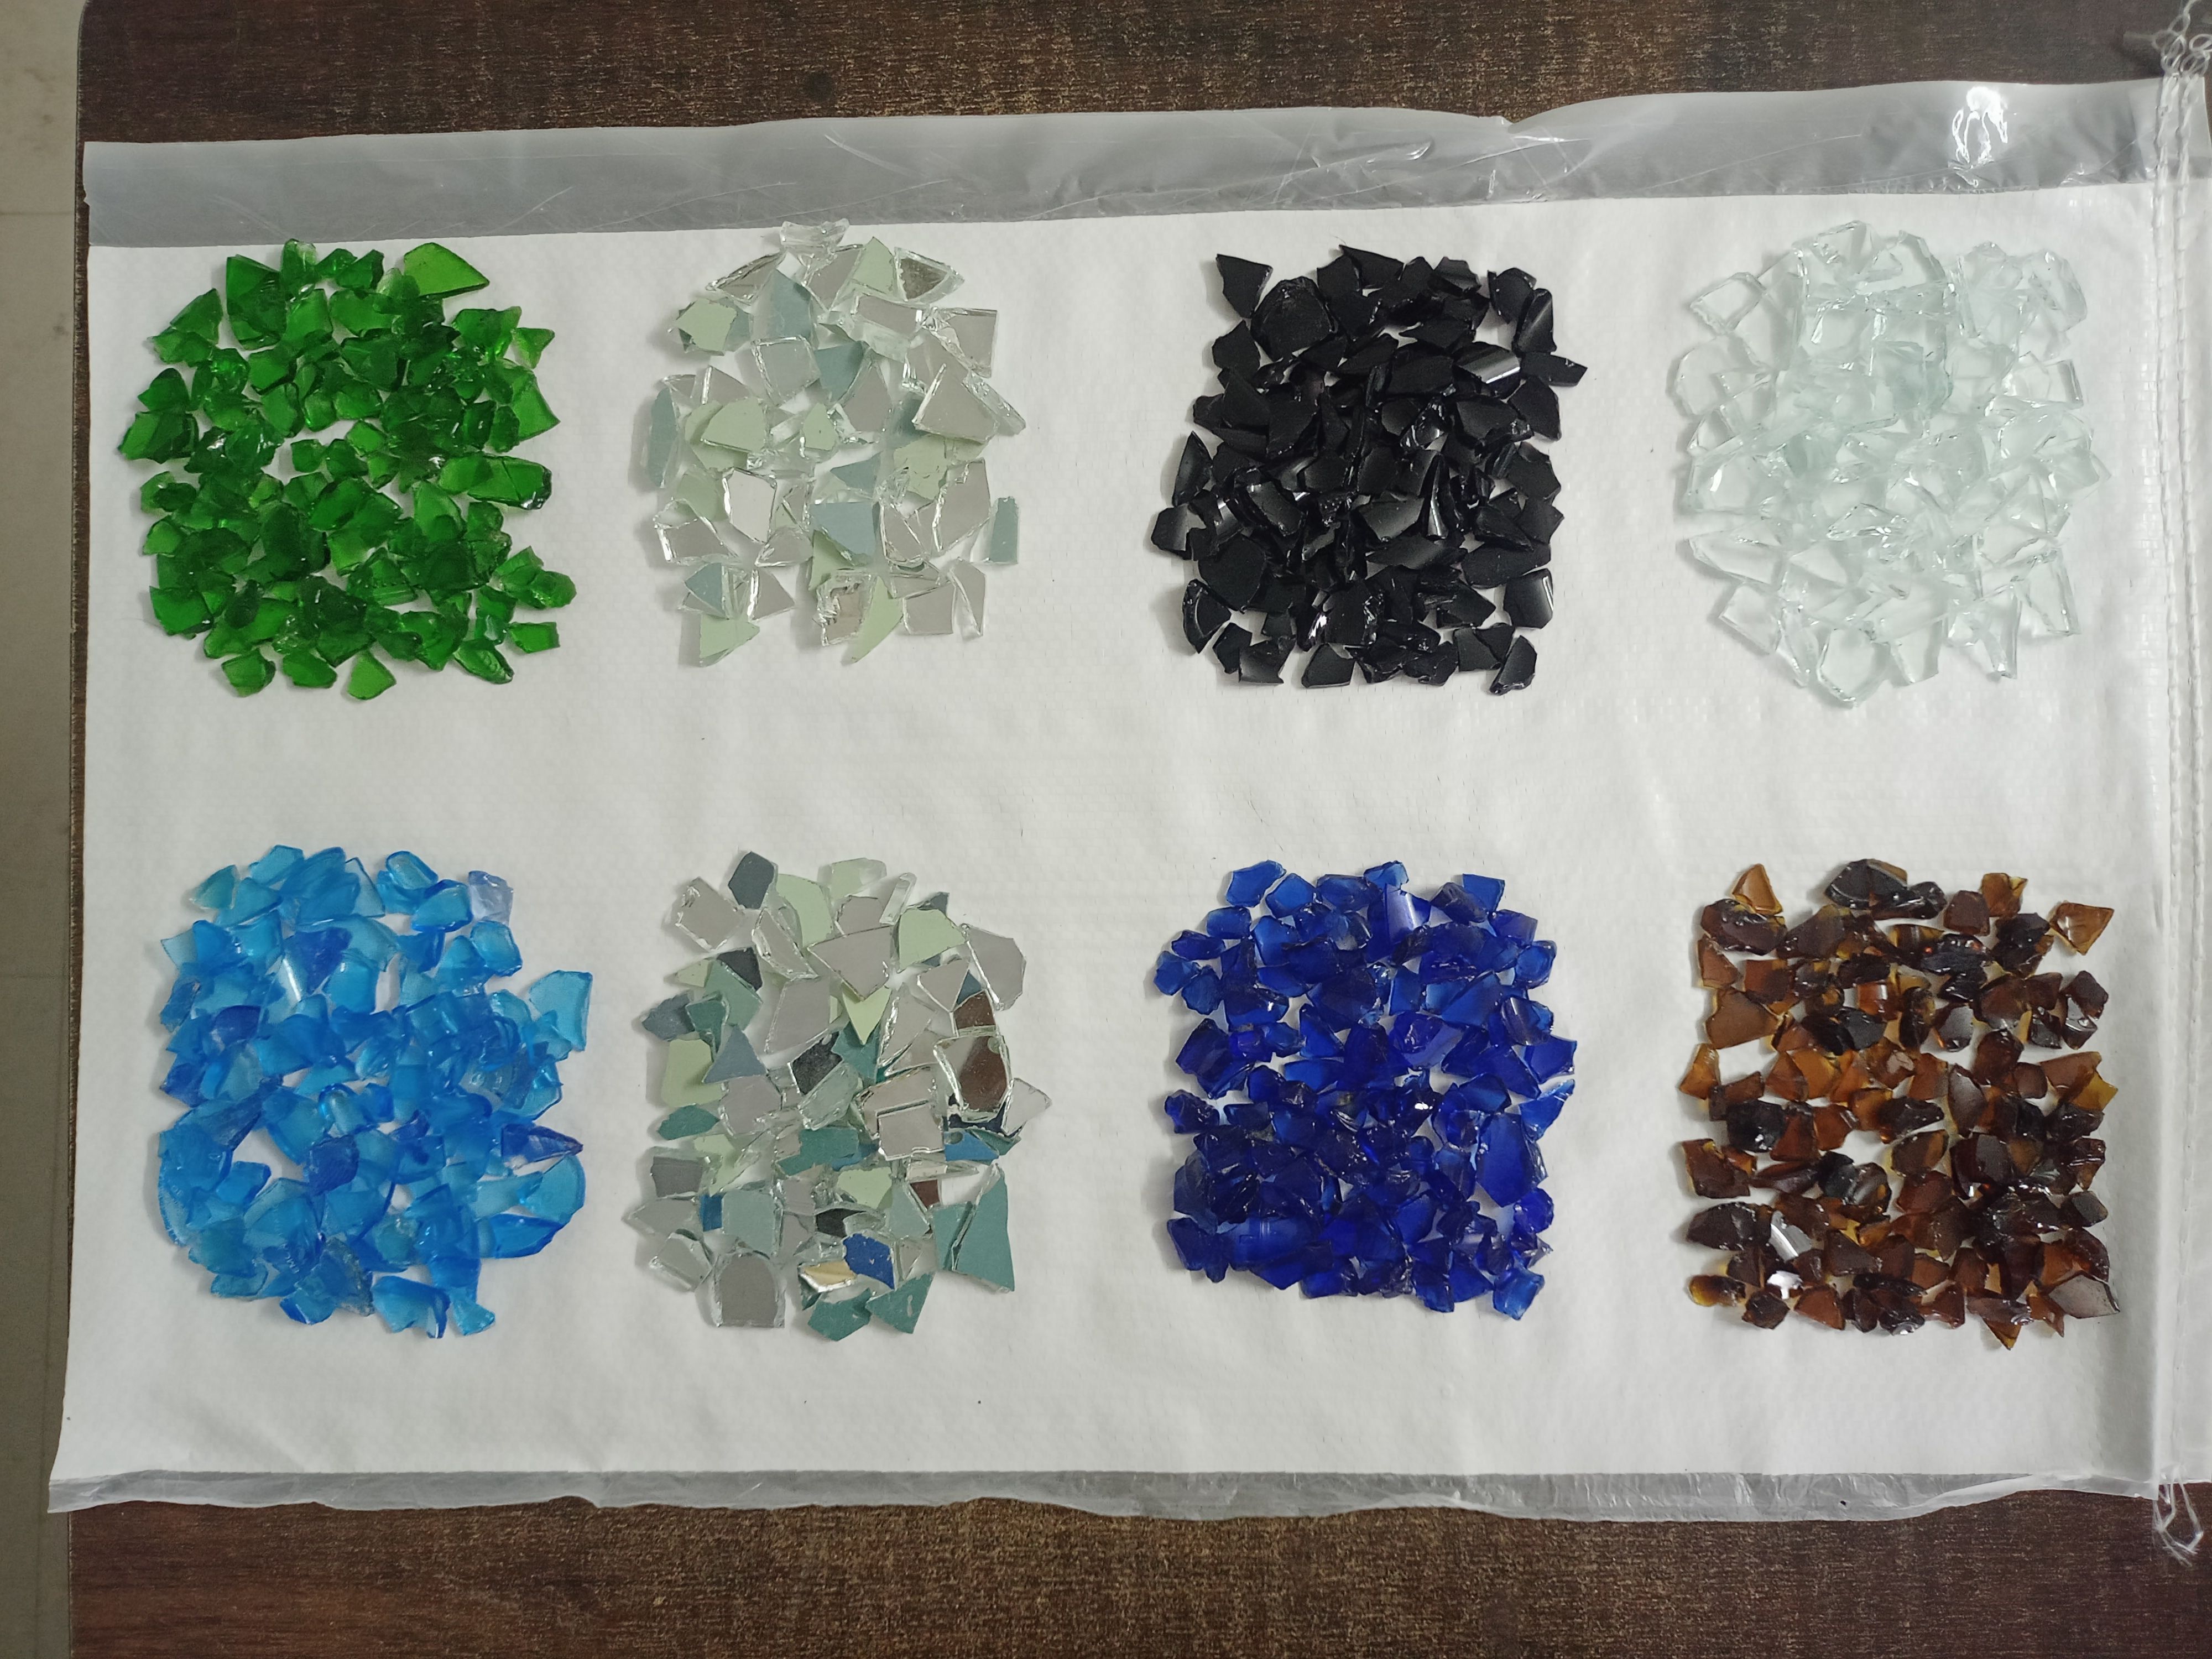 Recycal multi color mix glass chipa and aggregate 6-9 mm special primium terrazzo flooring